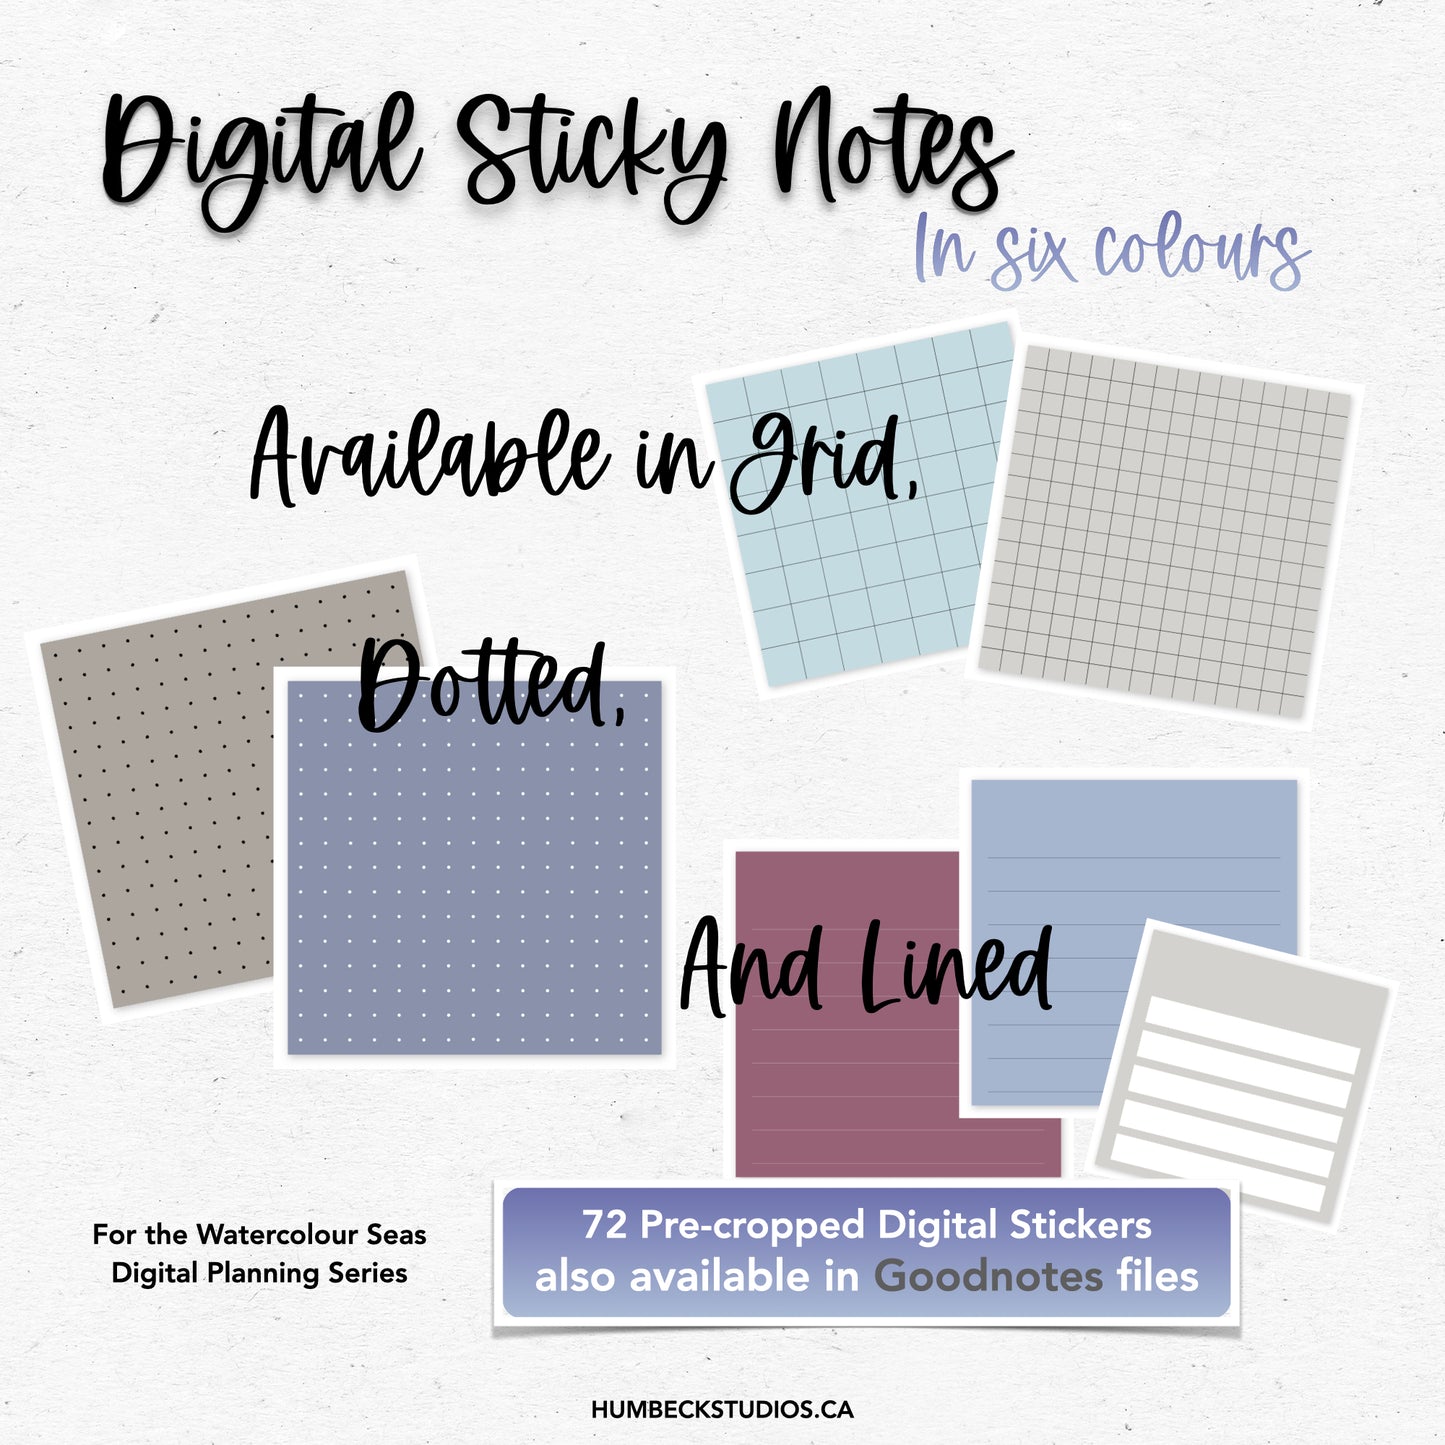 Digital Sticky Notes - Watercolour Seas Collection